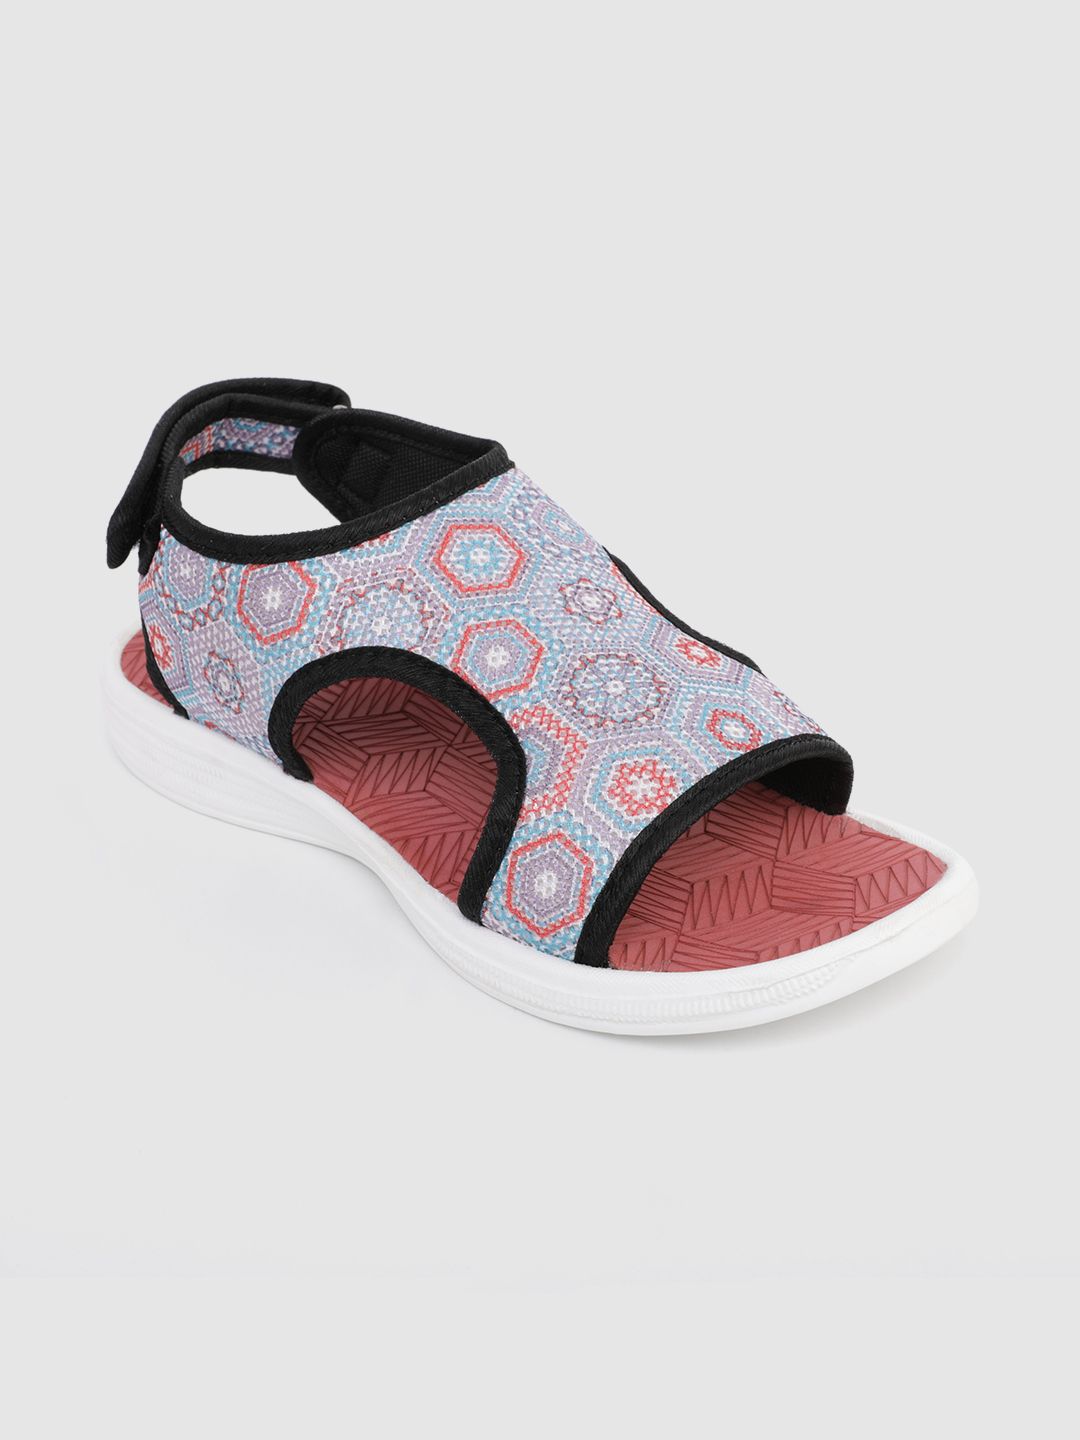 Kook N Keech Women Multicoloured Woven Design Sports Sandals with Cut-Out Price in India